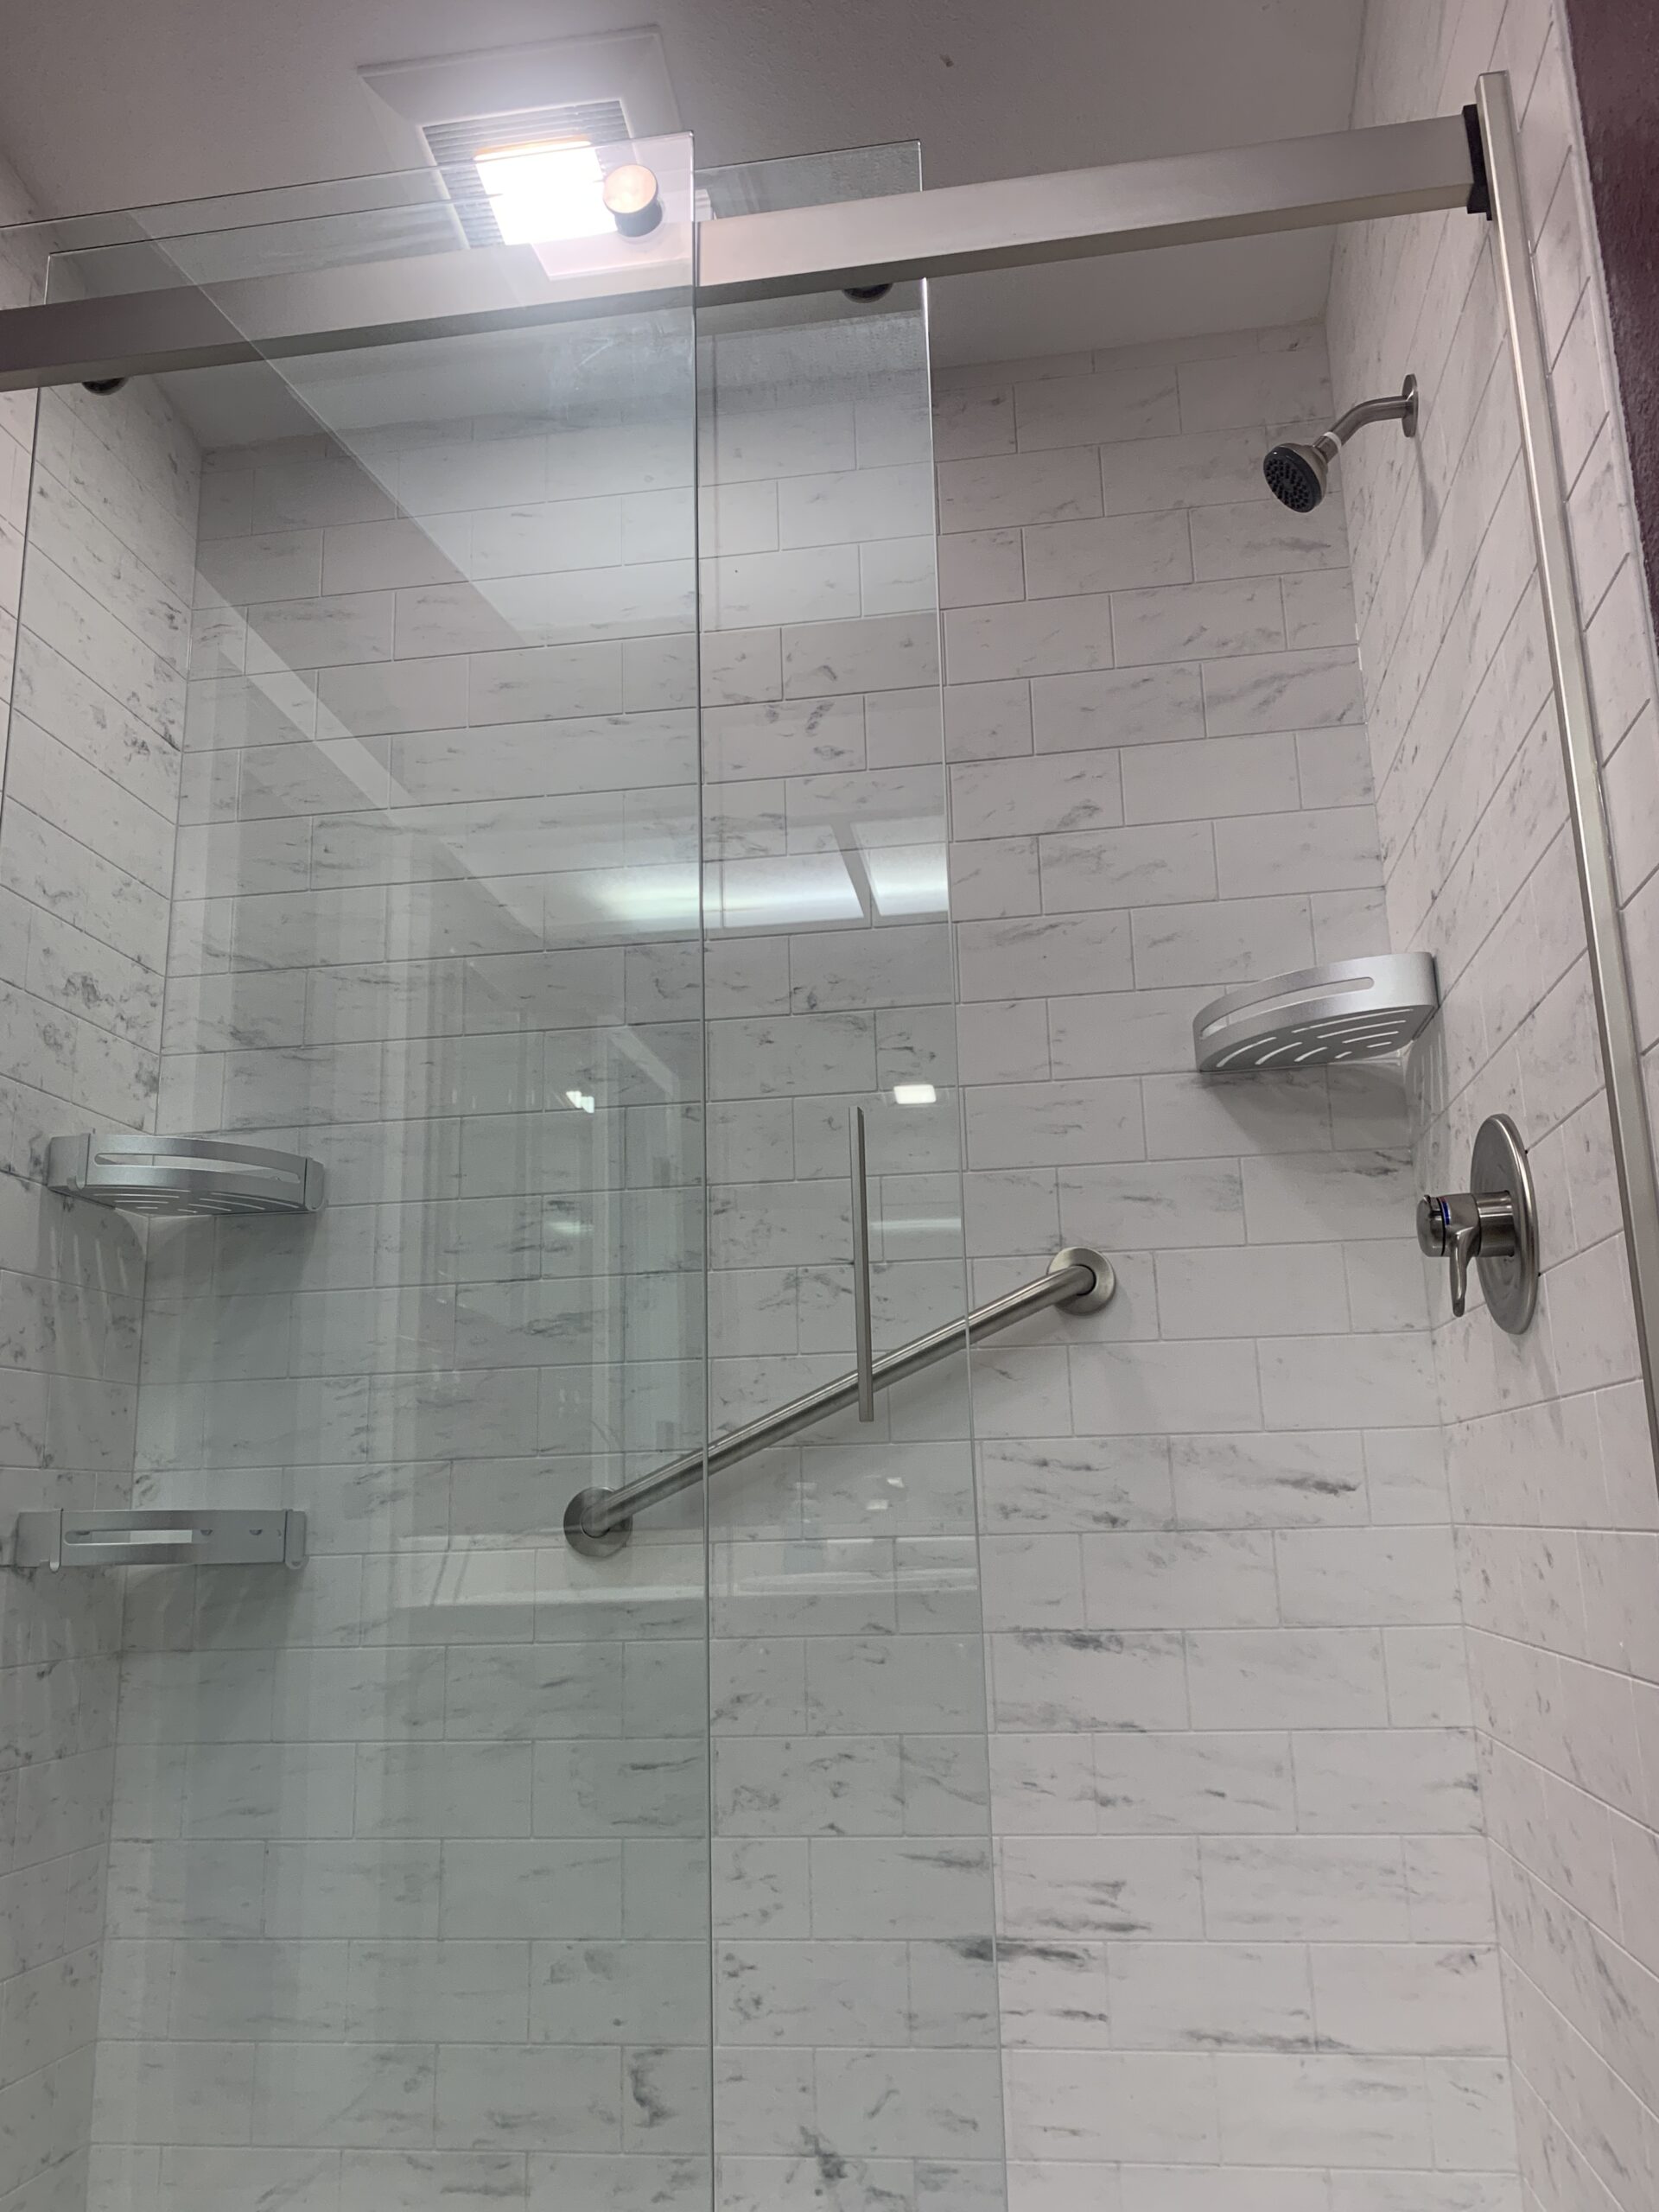 Bathtub to Shower Conversion After